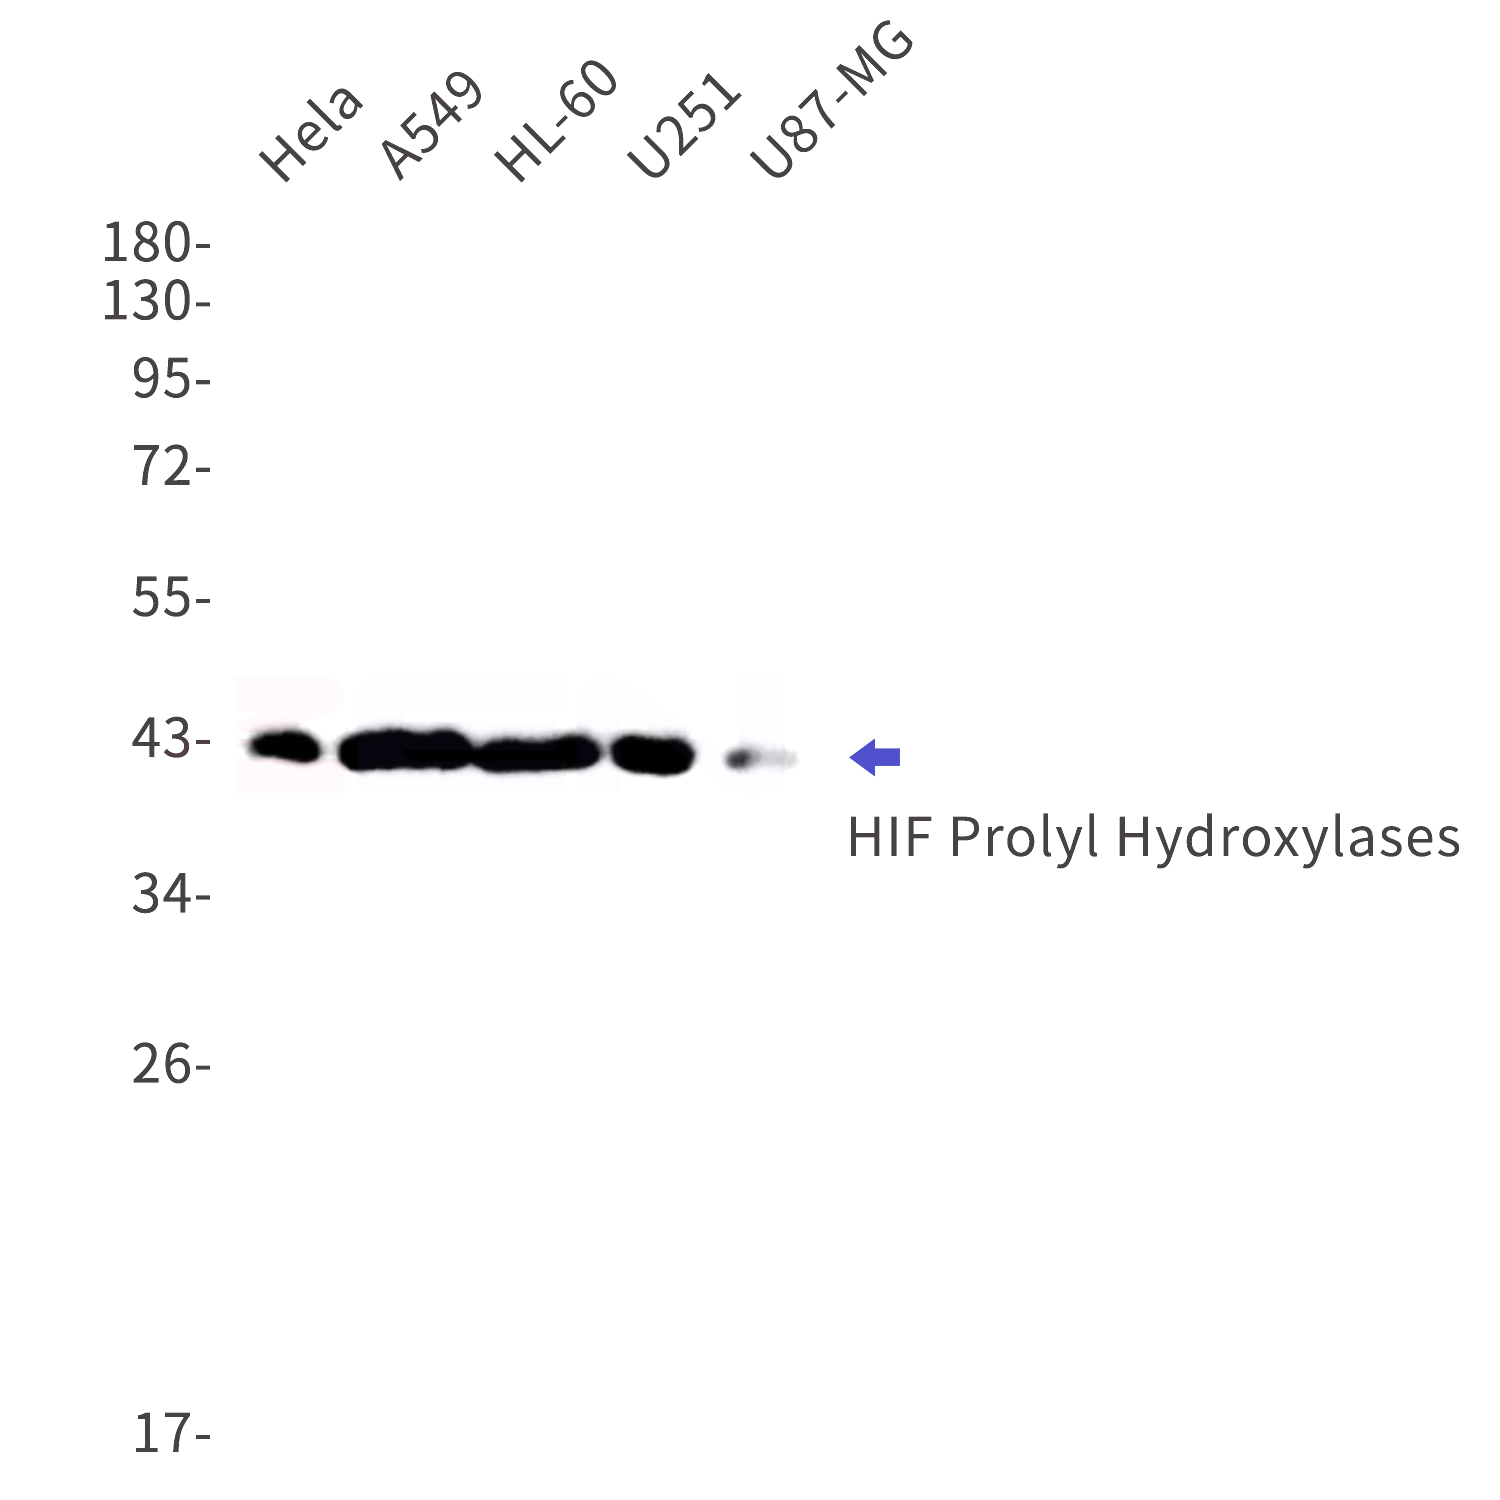 Western blot detection of HIF Prolyl Hydroxylases in Hela,A549,HL-60,U251,U87-MG cell lysates using HIF Prolyl Hydroxylases Rabbit mAb(1:1000 diluted).Predicted band size:57kDa.Observed band size:43kDa.